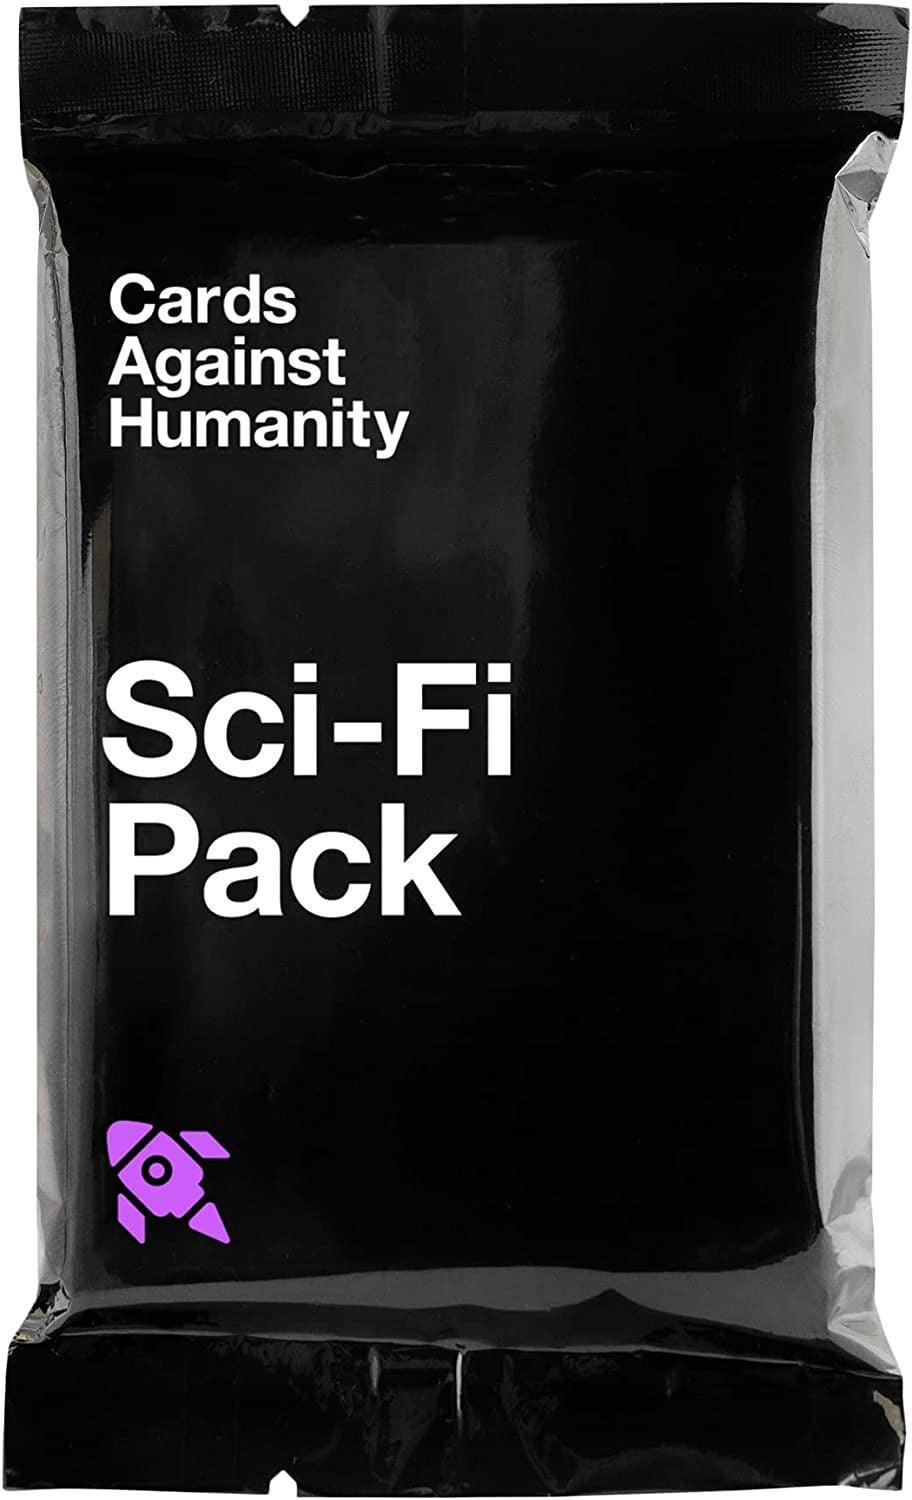 VR-50218 Cards Against Humanity Sci-Fi Pack (Do not sell on online marketplaces) - Cards Against Humanity - Titan Pop Culture